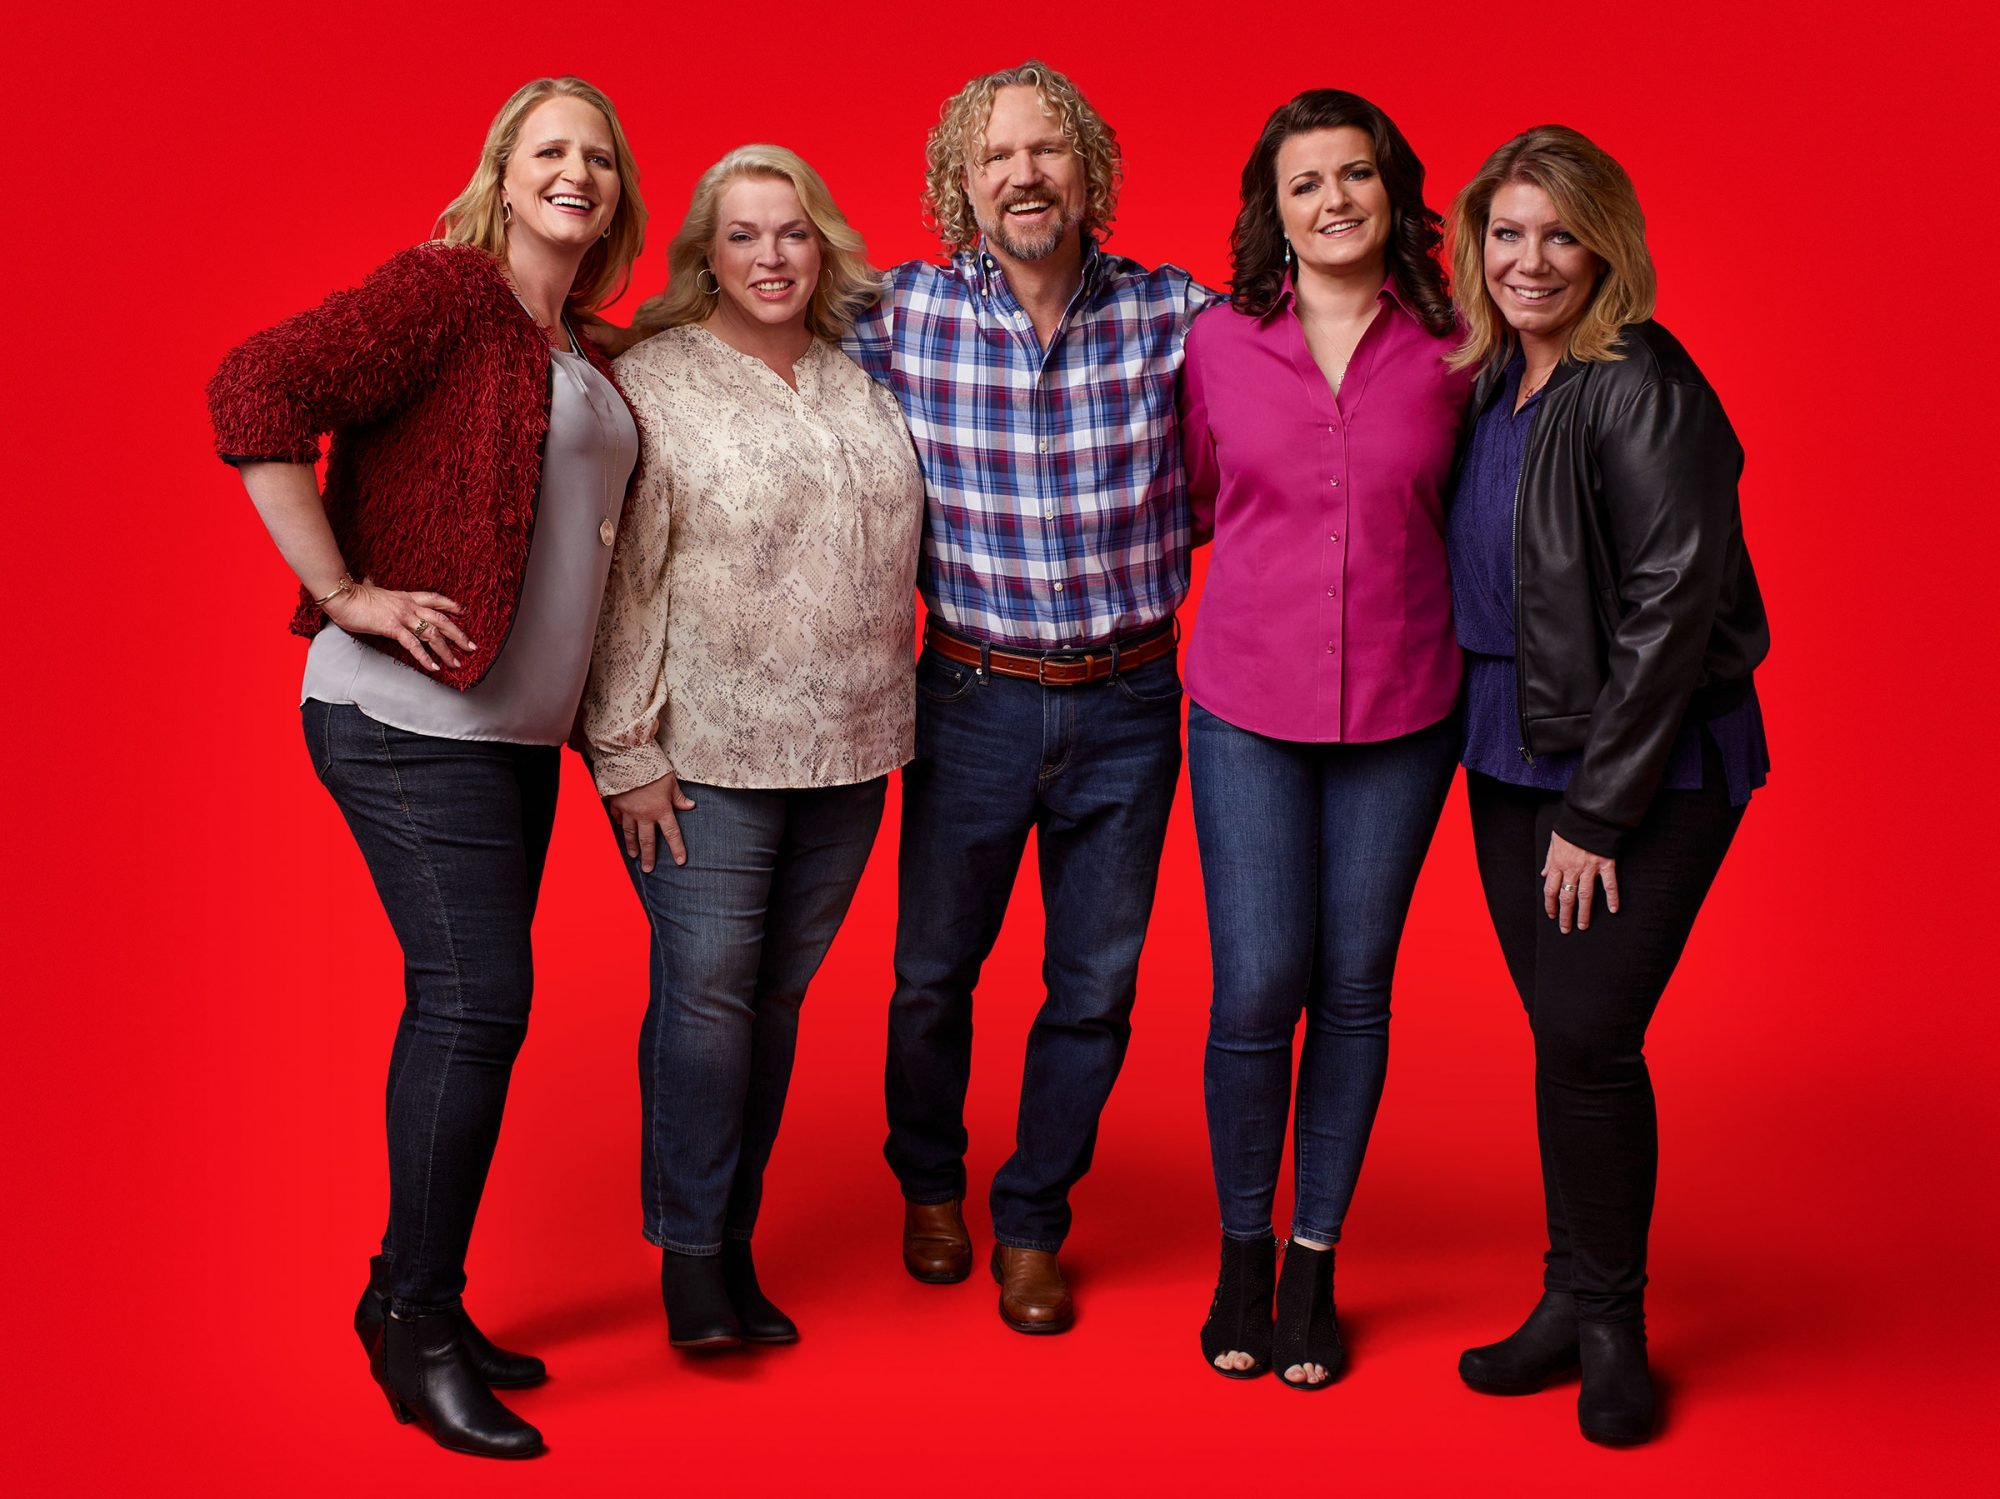 Christine Brown, Janelle Brown, Kody Brown, Robyn Brown, and Meri Brown ‘Sister Wives’ standing in front of a red background.